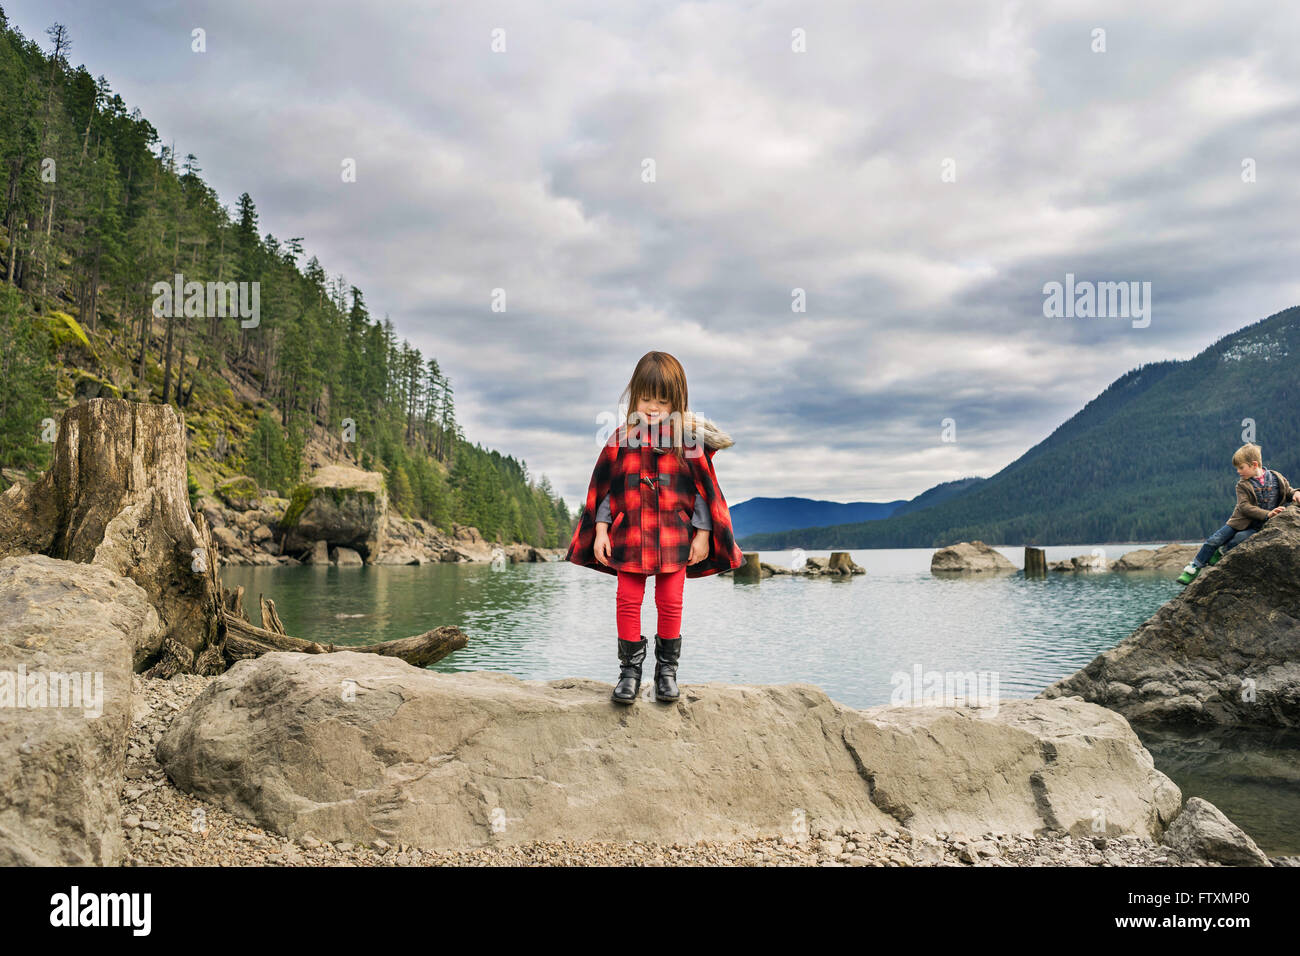 Young girl standing on rock in river valley Stock Photo